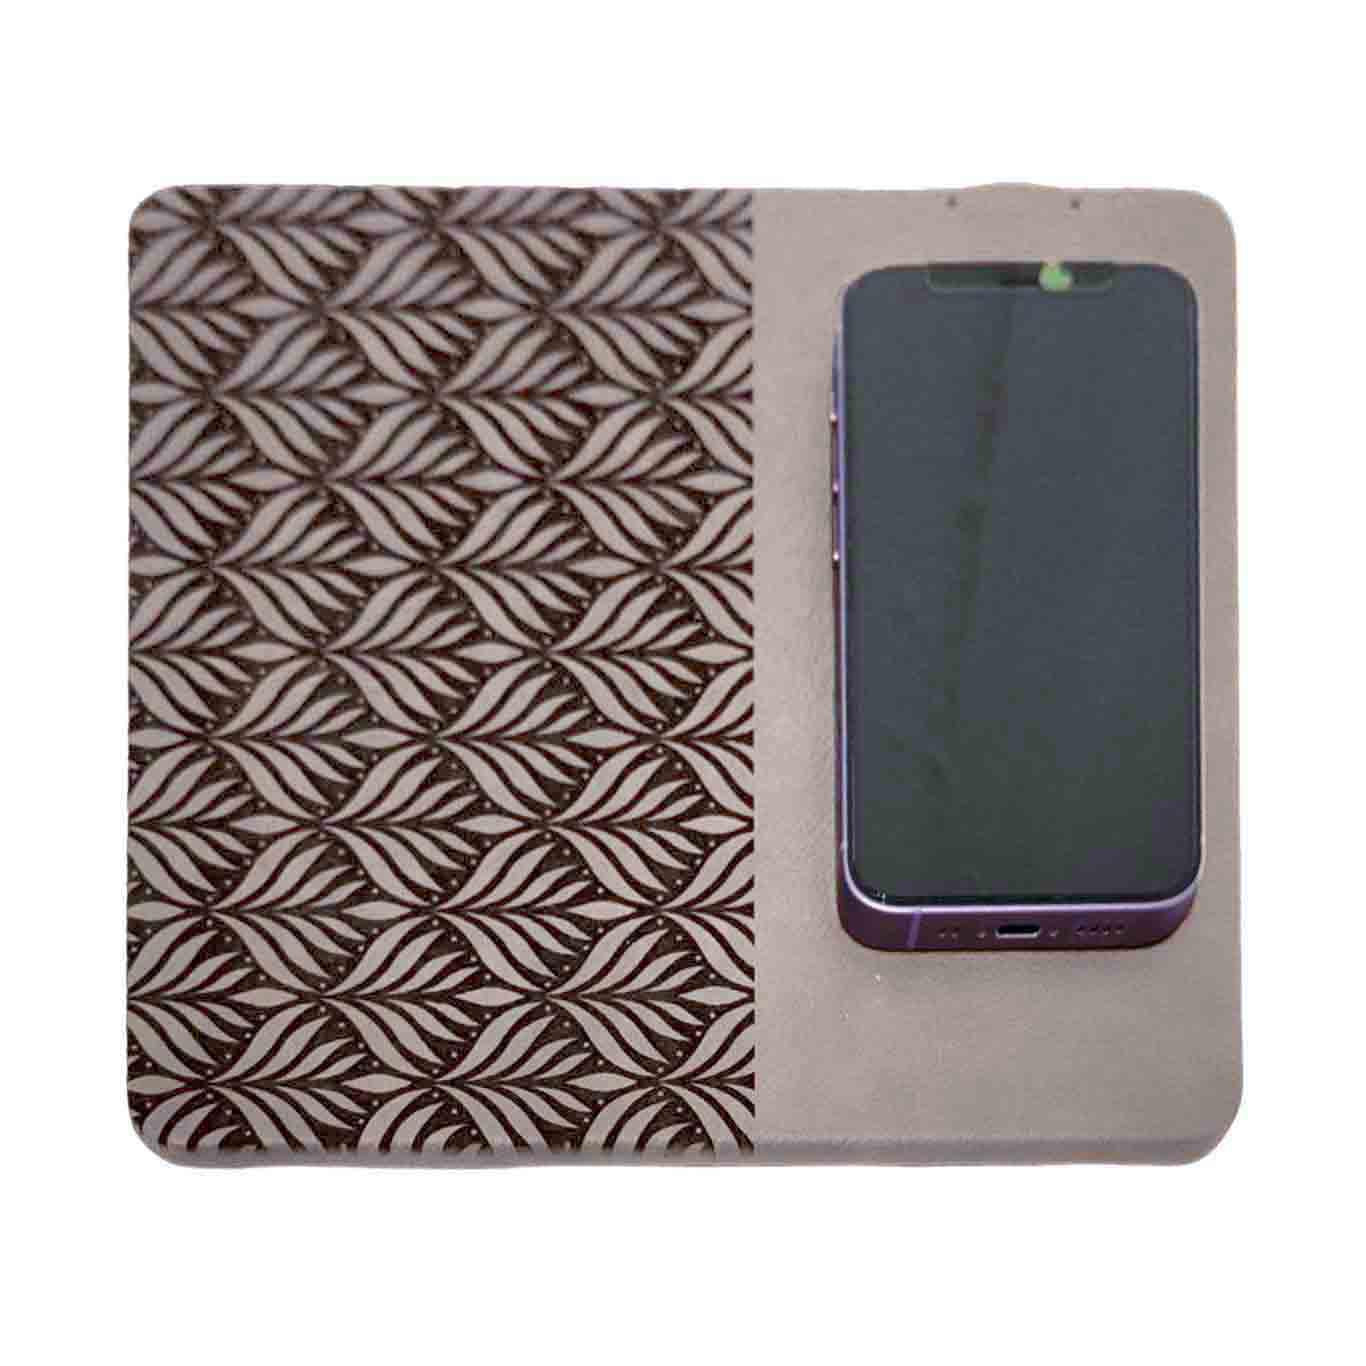 Charging Pad - Lotus in Gray and Black by Lucca